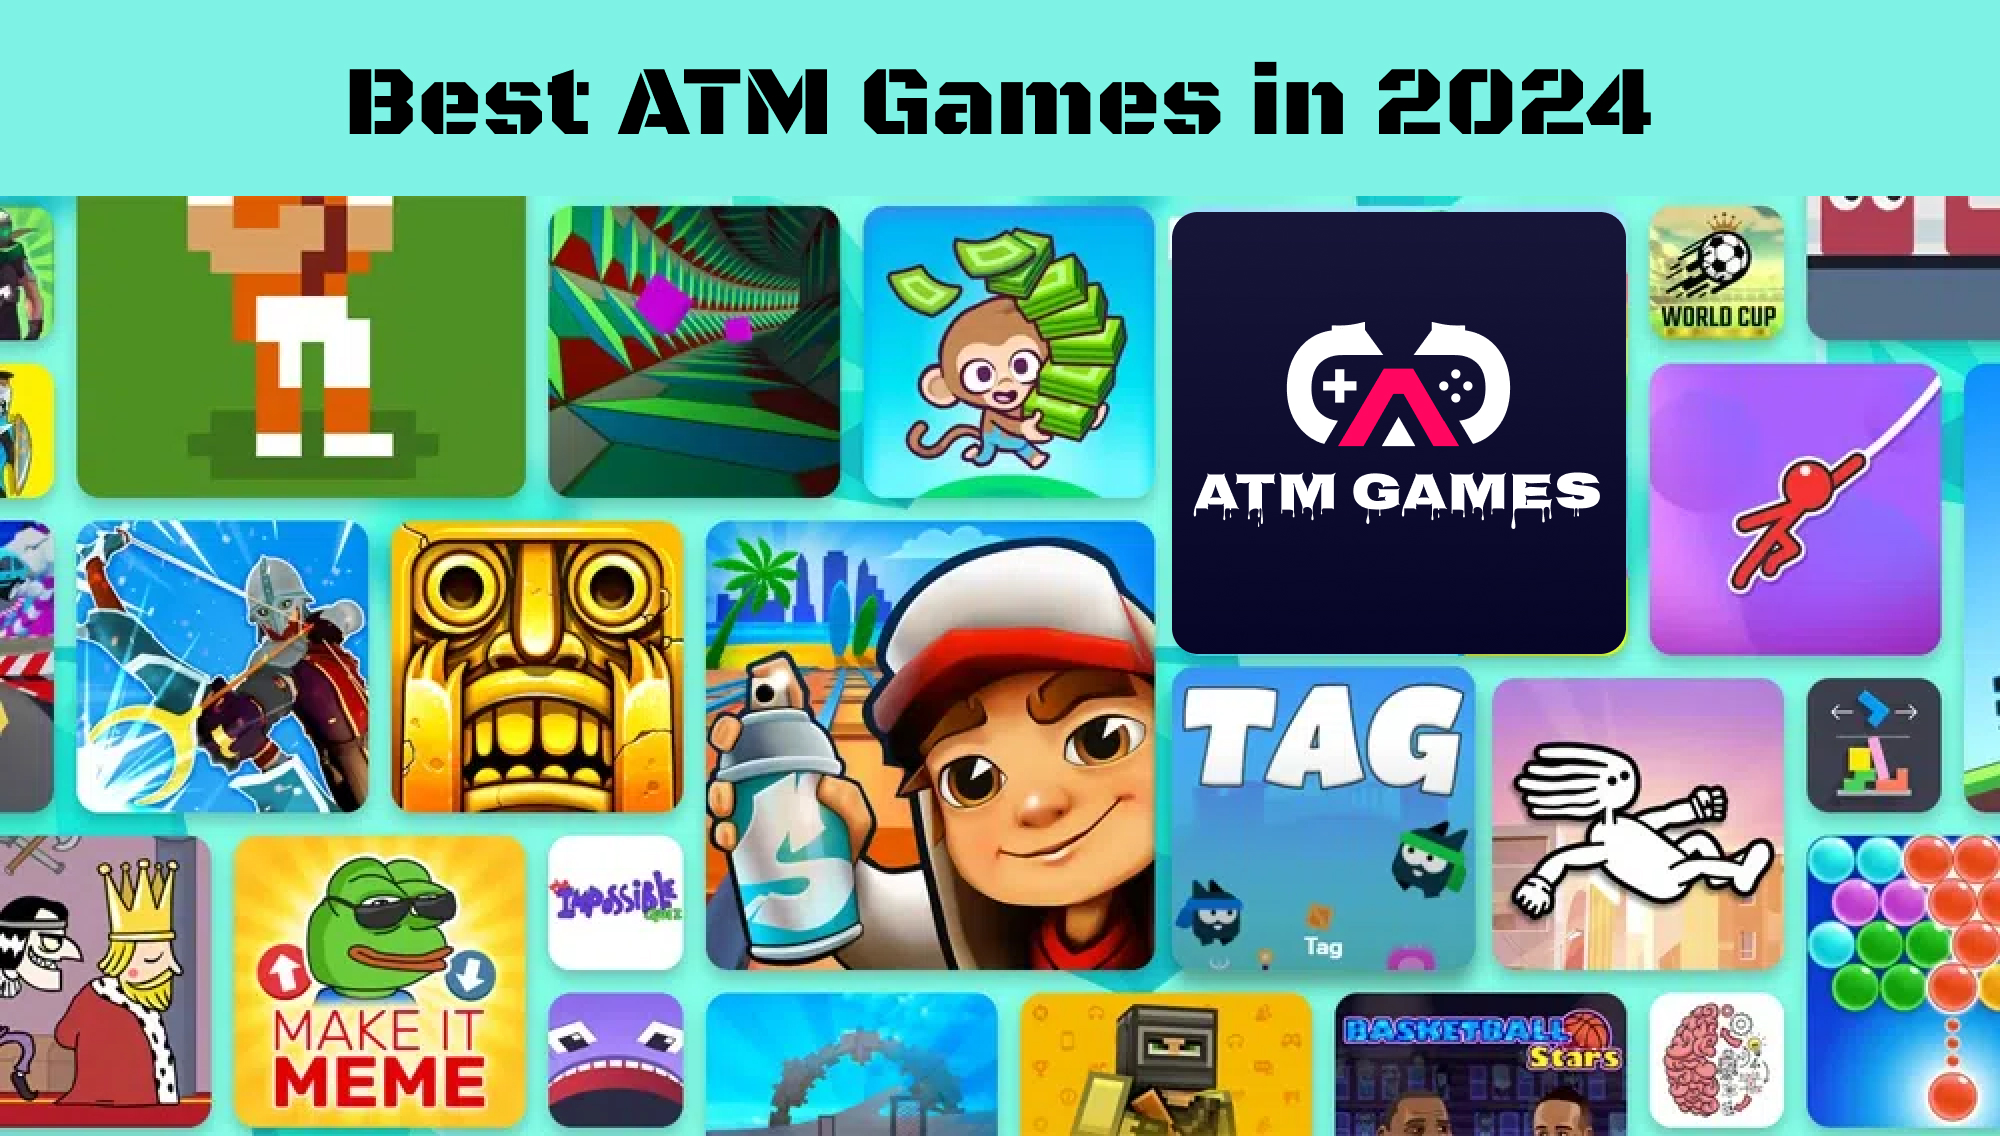 Best ATM Games in 2024